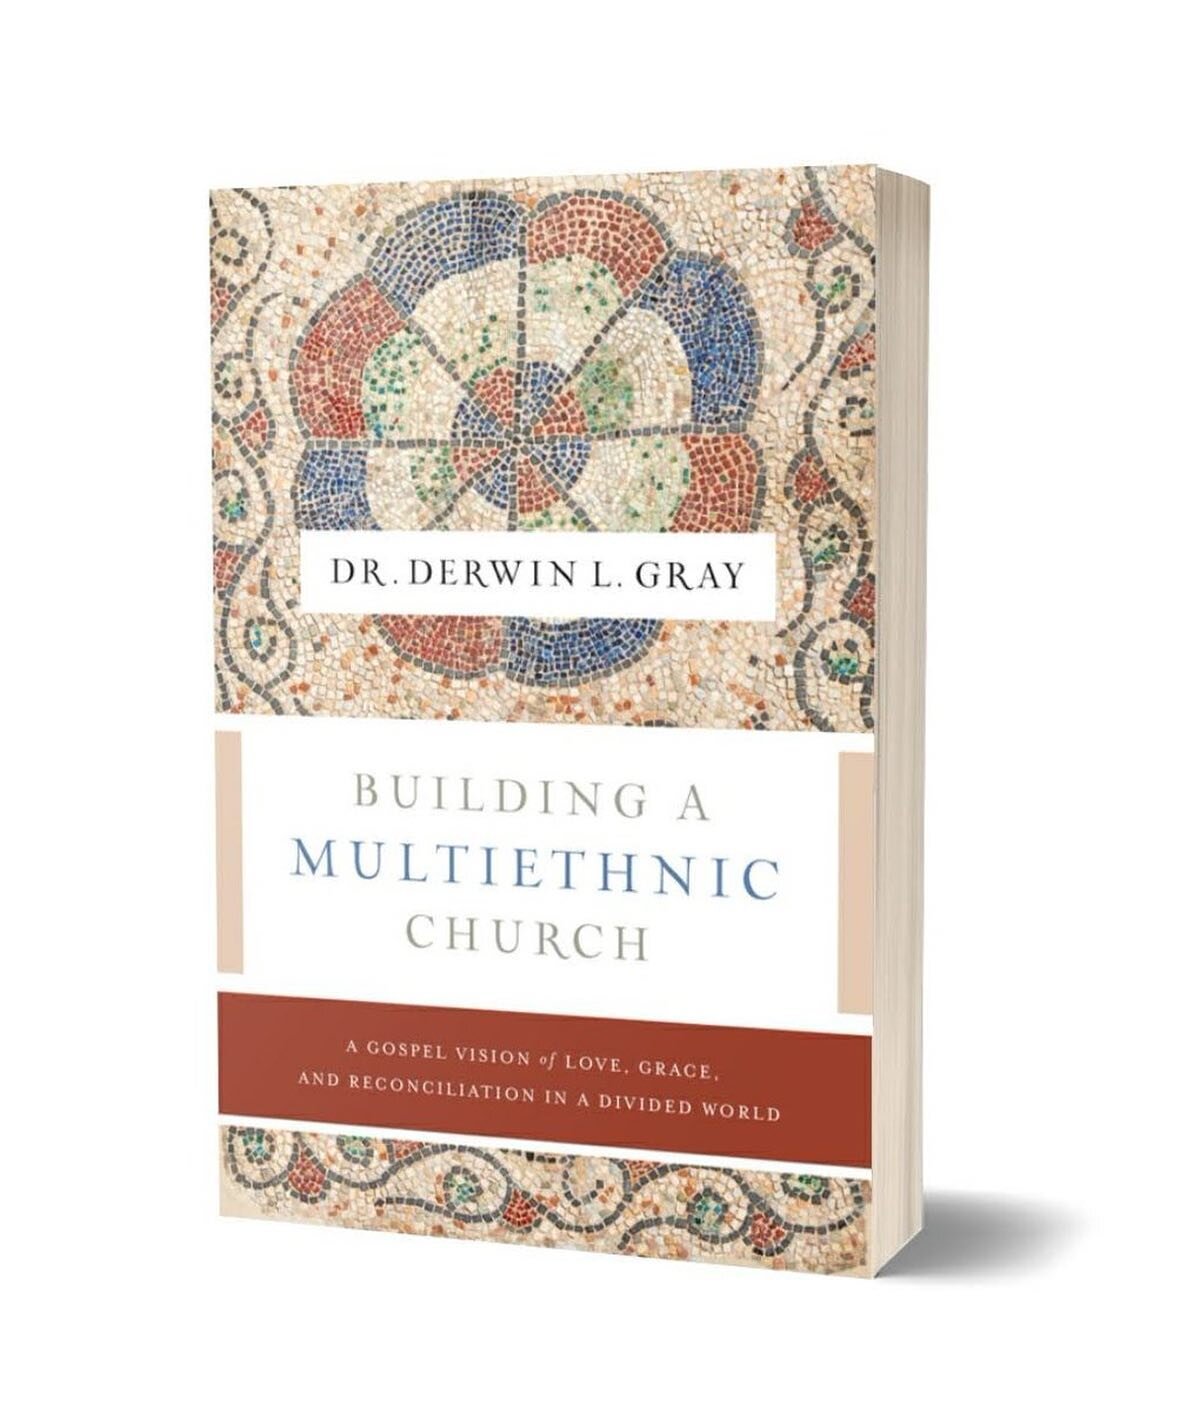 One Family Church will be starting a book study on September 12th! The book is called: &ldquo;Building a Multiethnic Church: A Gospel Vision of Love, Grace, and Reconciliation in a Divided World&rdquo; by Derwin Gray. Join the Book Study group on Sla